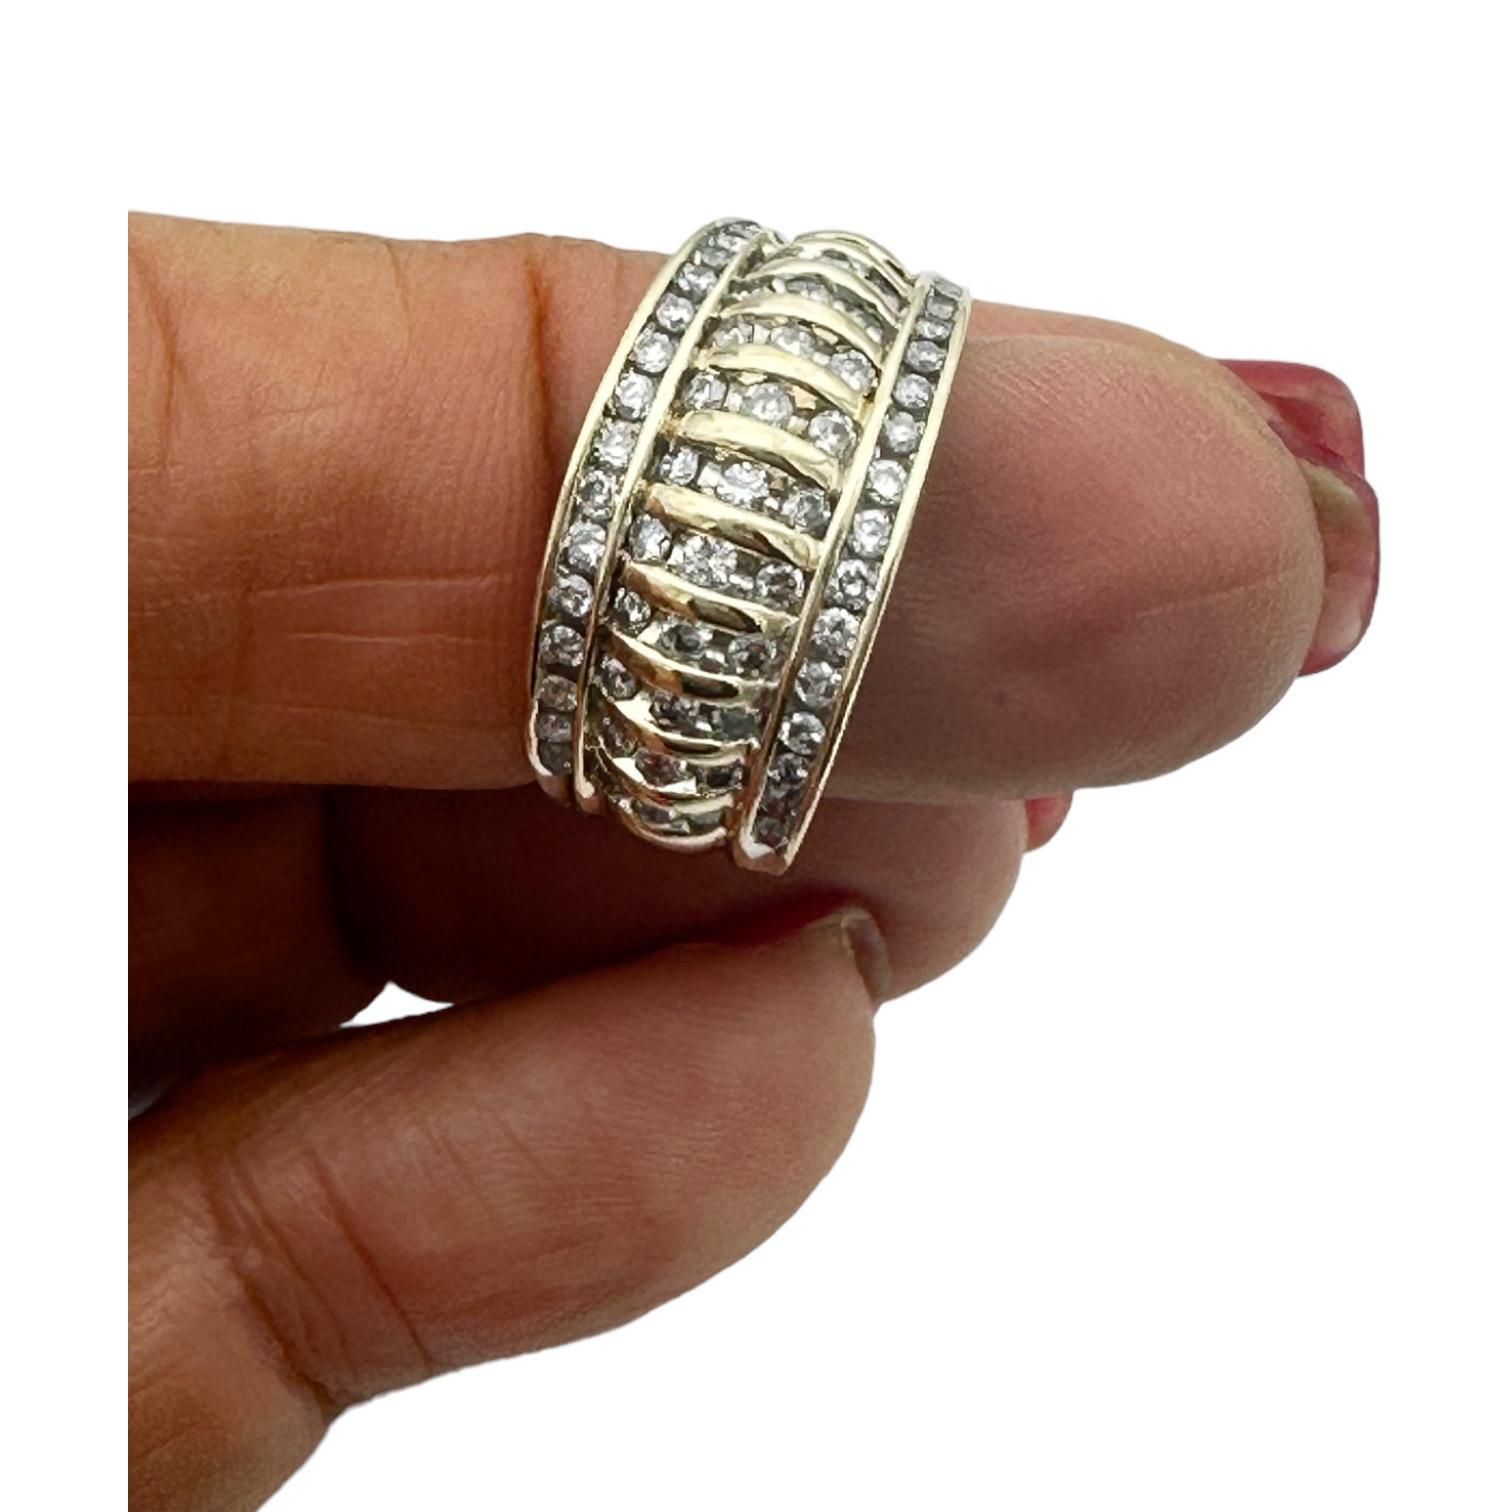 This 14-carat diamond dome channel set ring is expertly crafted from quality materials. Its dome shape and channel set design create an elegant look, perfect for any special occasion. Your diamond shines bright in the light with a unique sparkle and